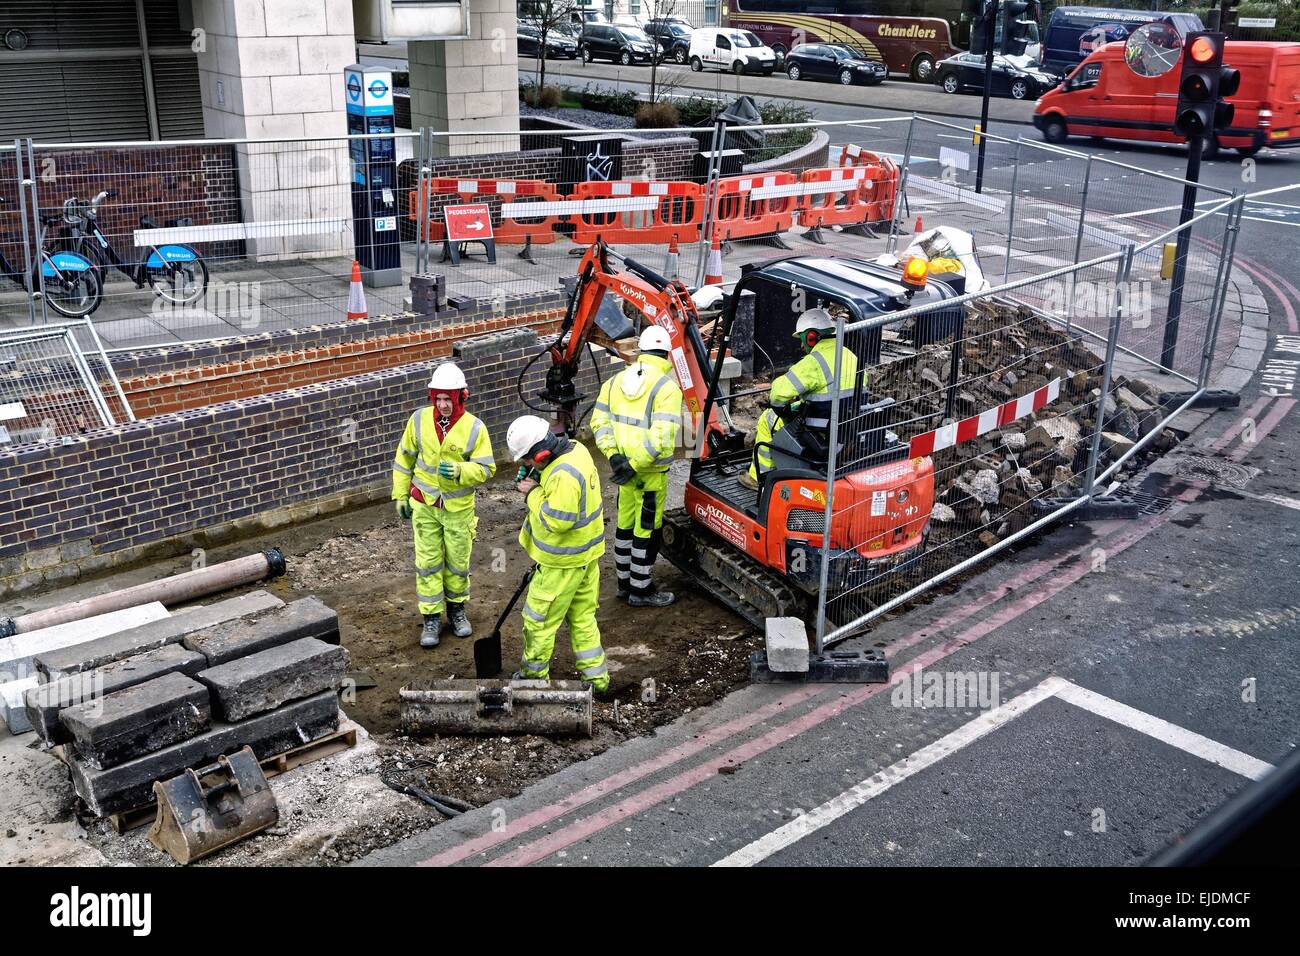 Roadworks being carried out on a Central London street England UK Stock Photo